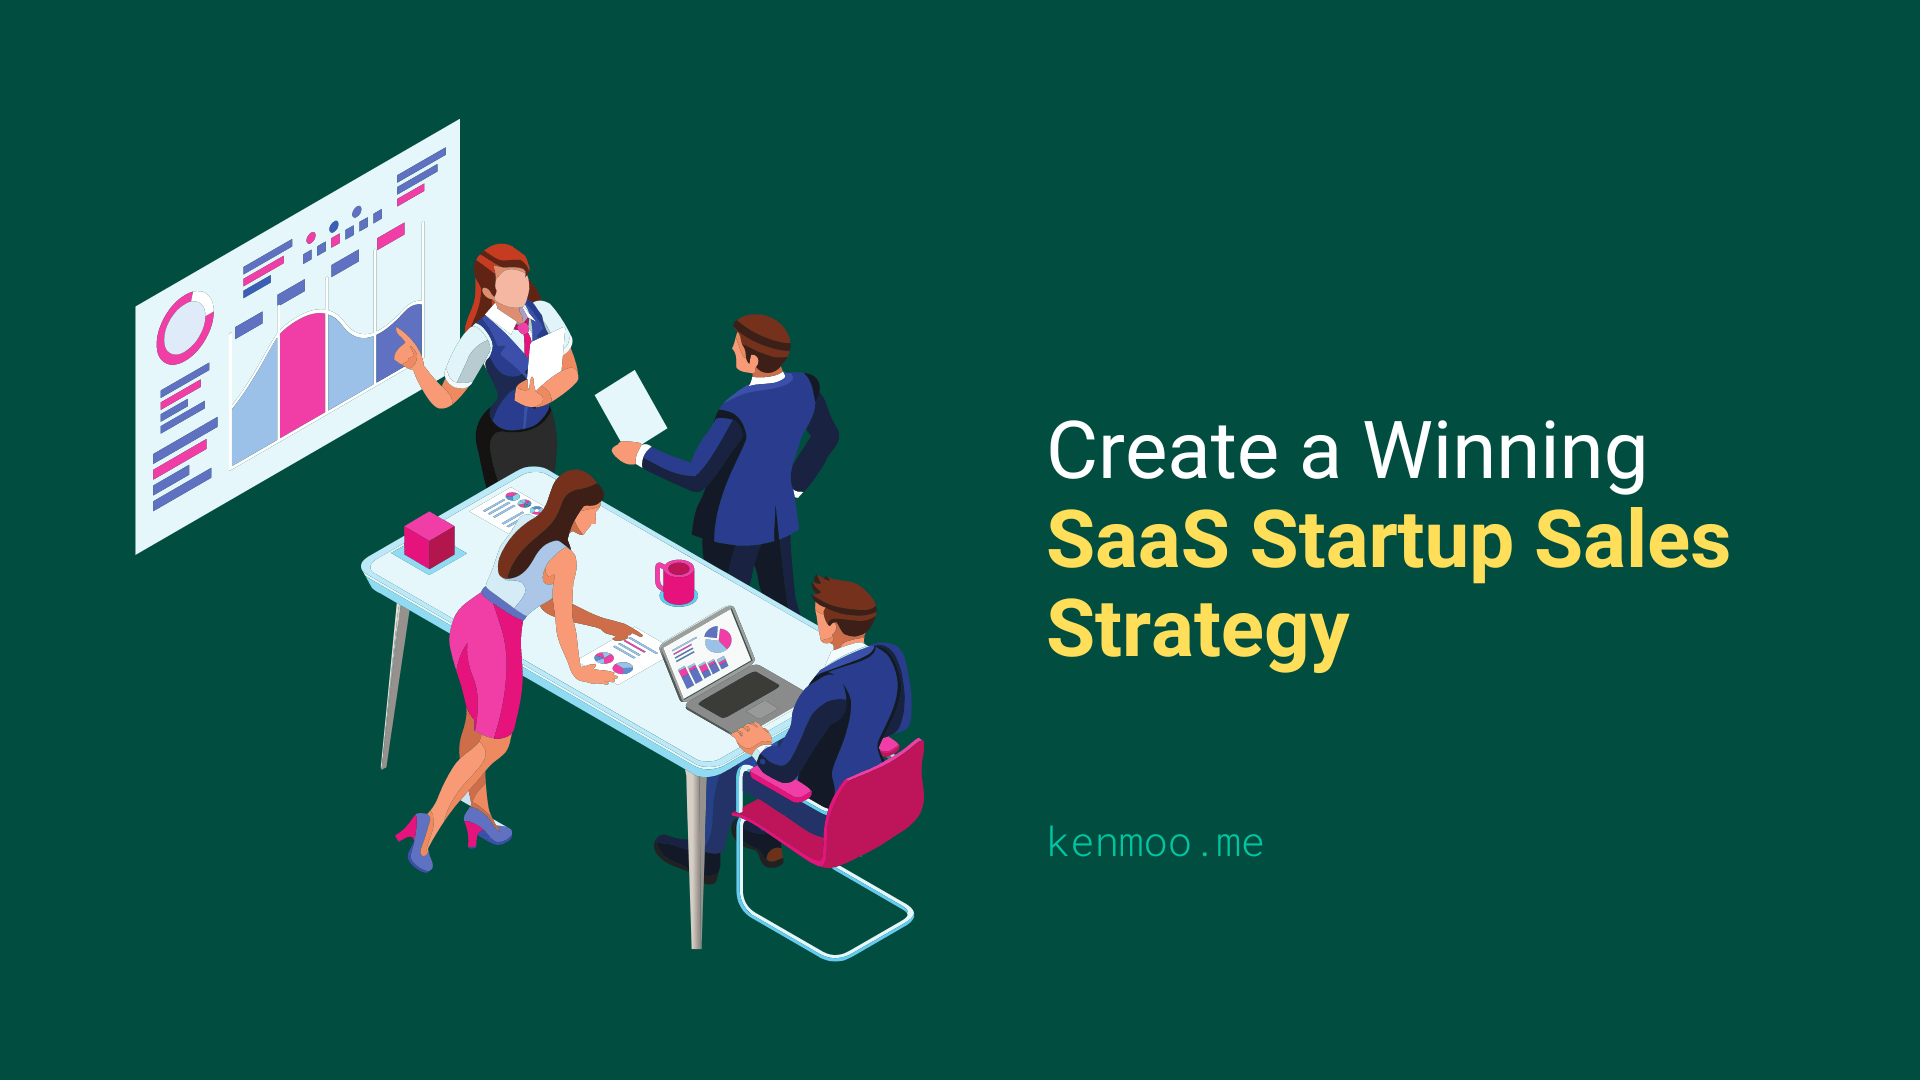 How to Create a Winning SaaS Startup Sales Strategy